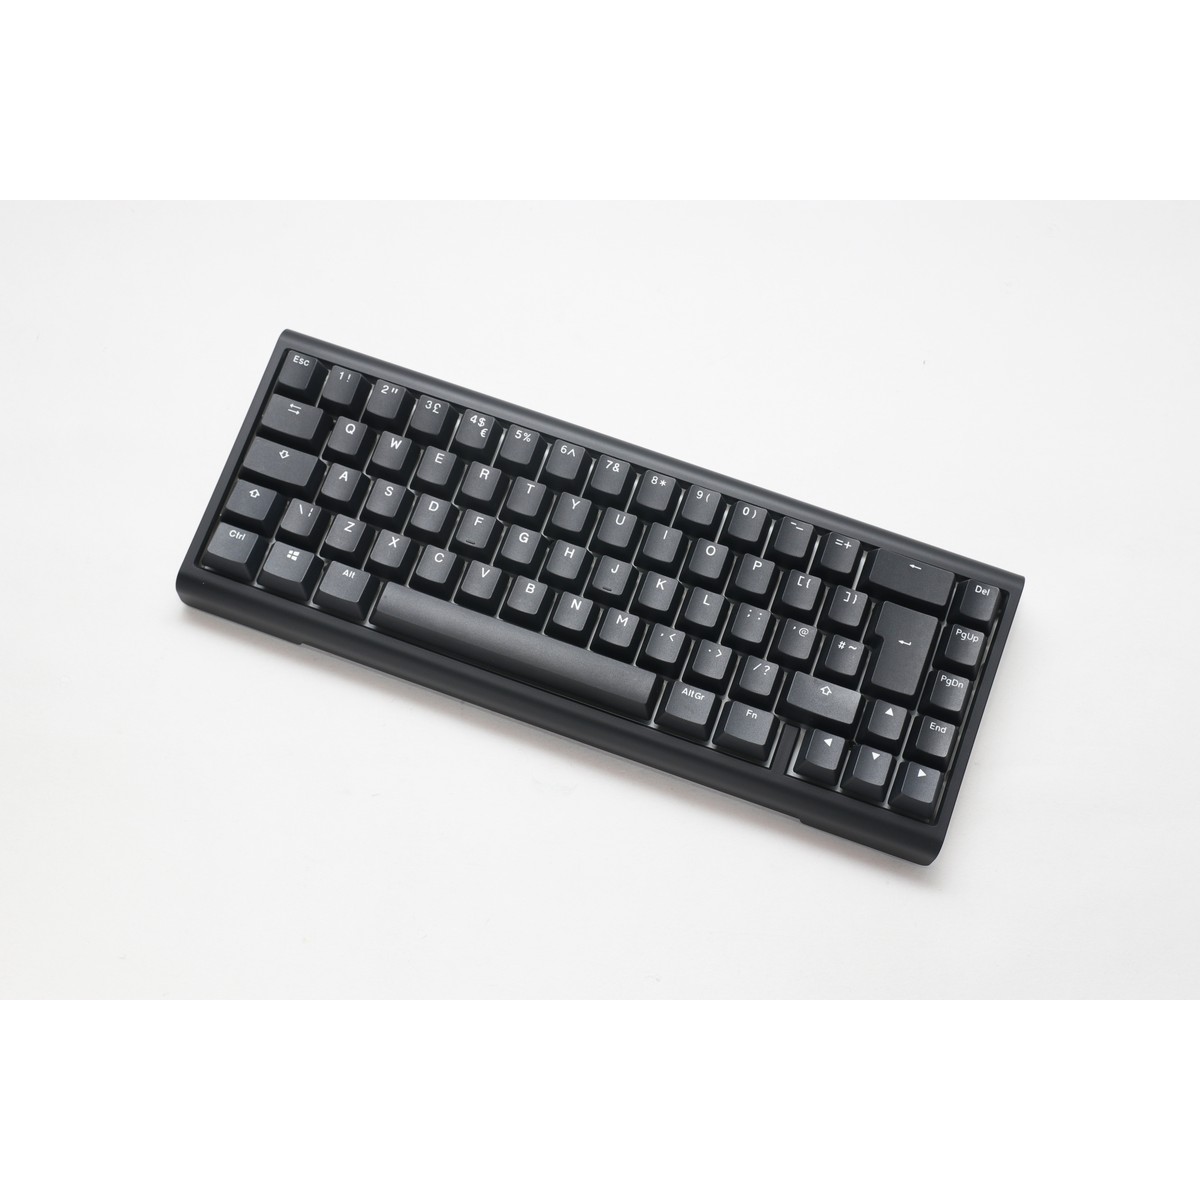 Ducky - Ducky ProjectD Tinker 65 Mechanical Gaming Customisable Keyboard Cherry MX Blue - Black